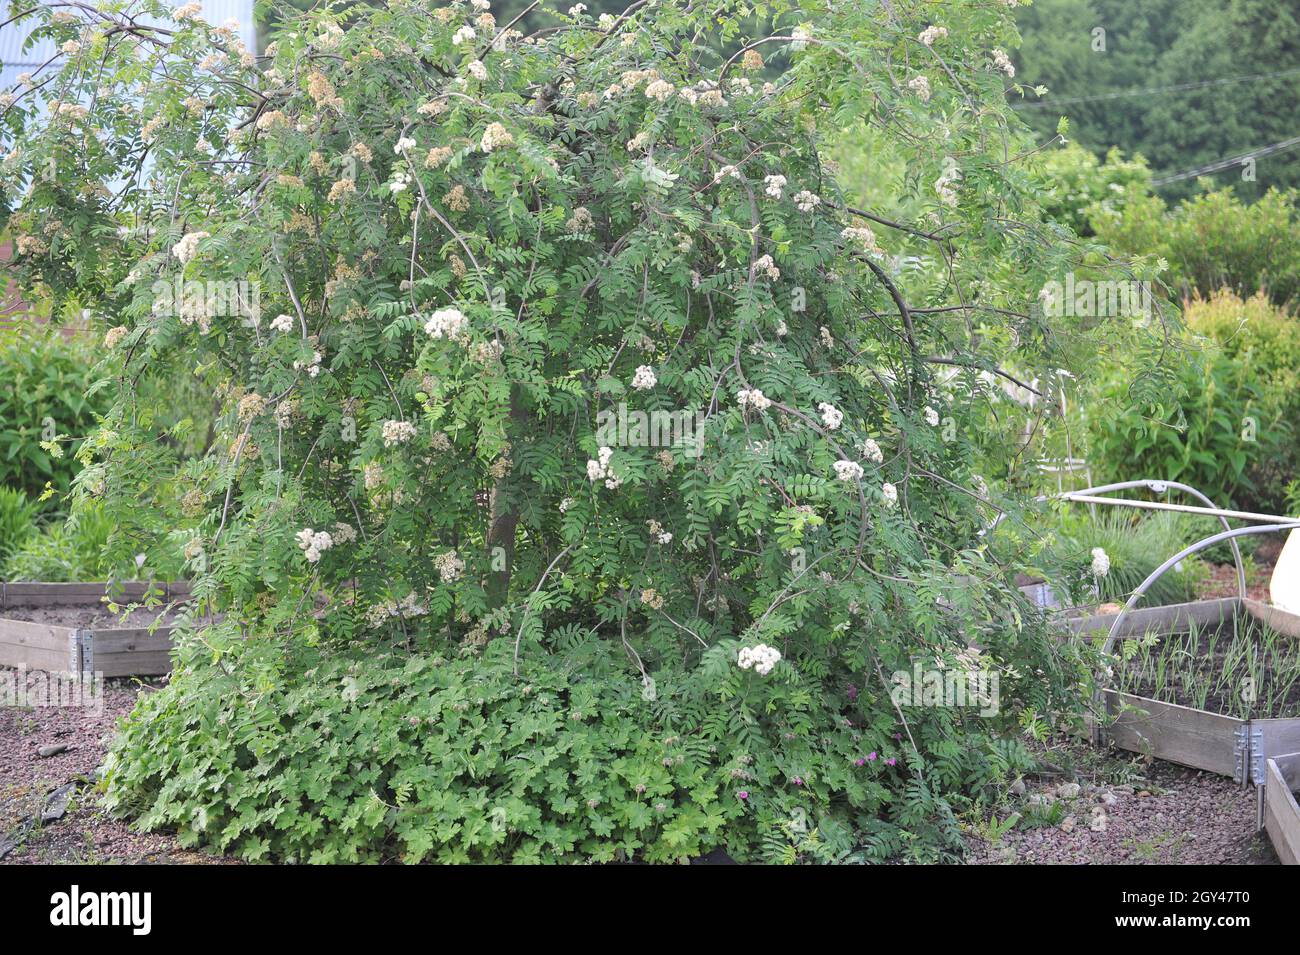 Weeping European mountain ash (Sorbus aucuparia Pendula) flowers in a middle of a vegetable garden with raised beds in a garden in May Stock Photo